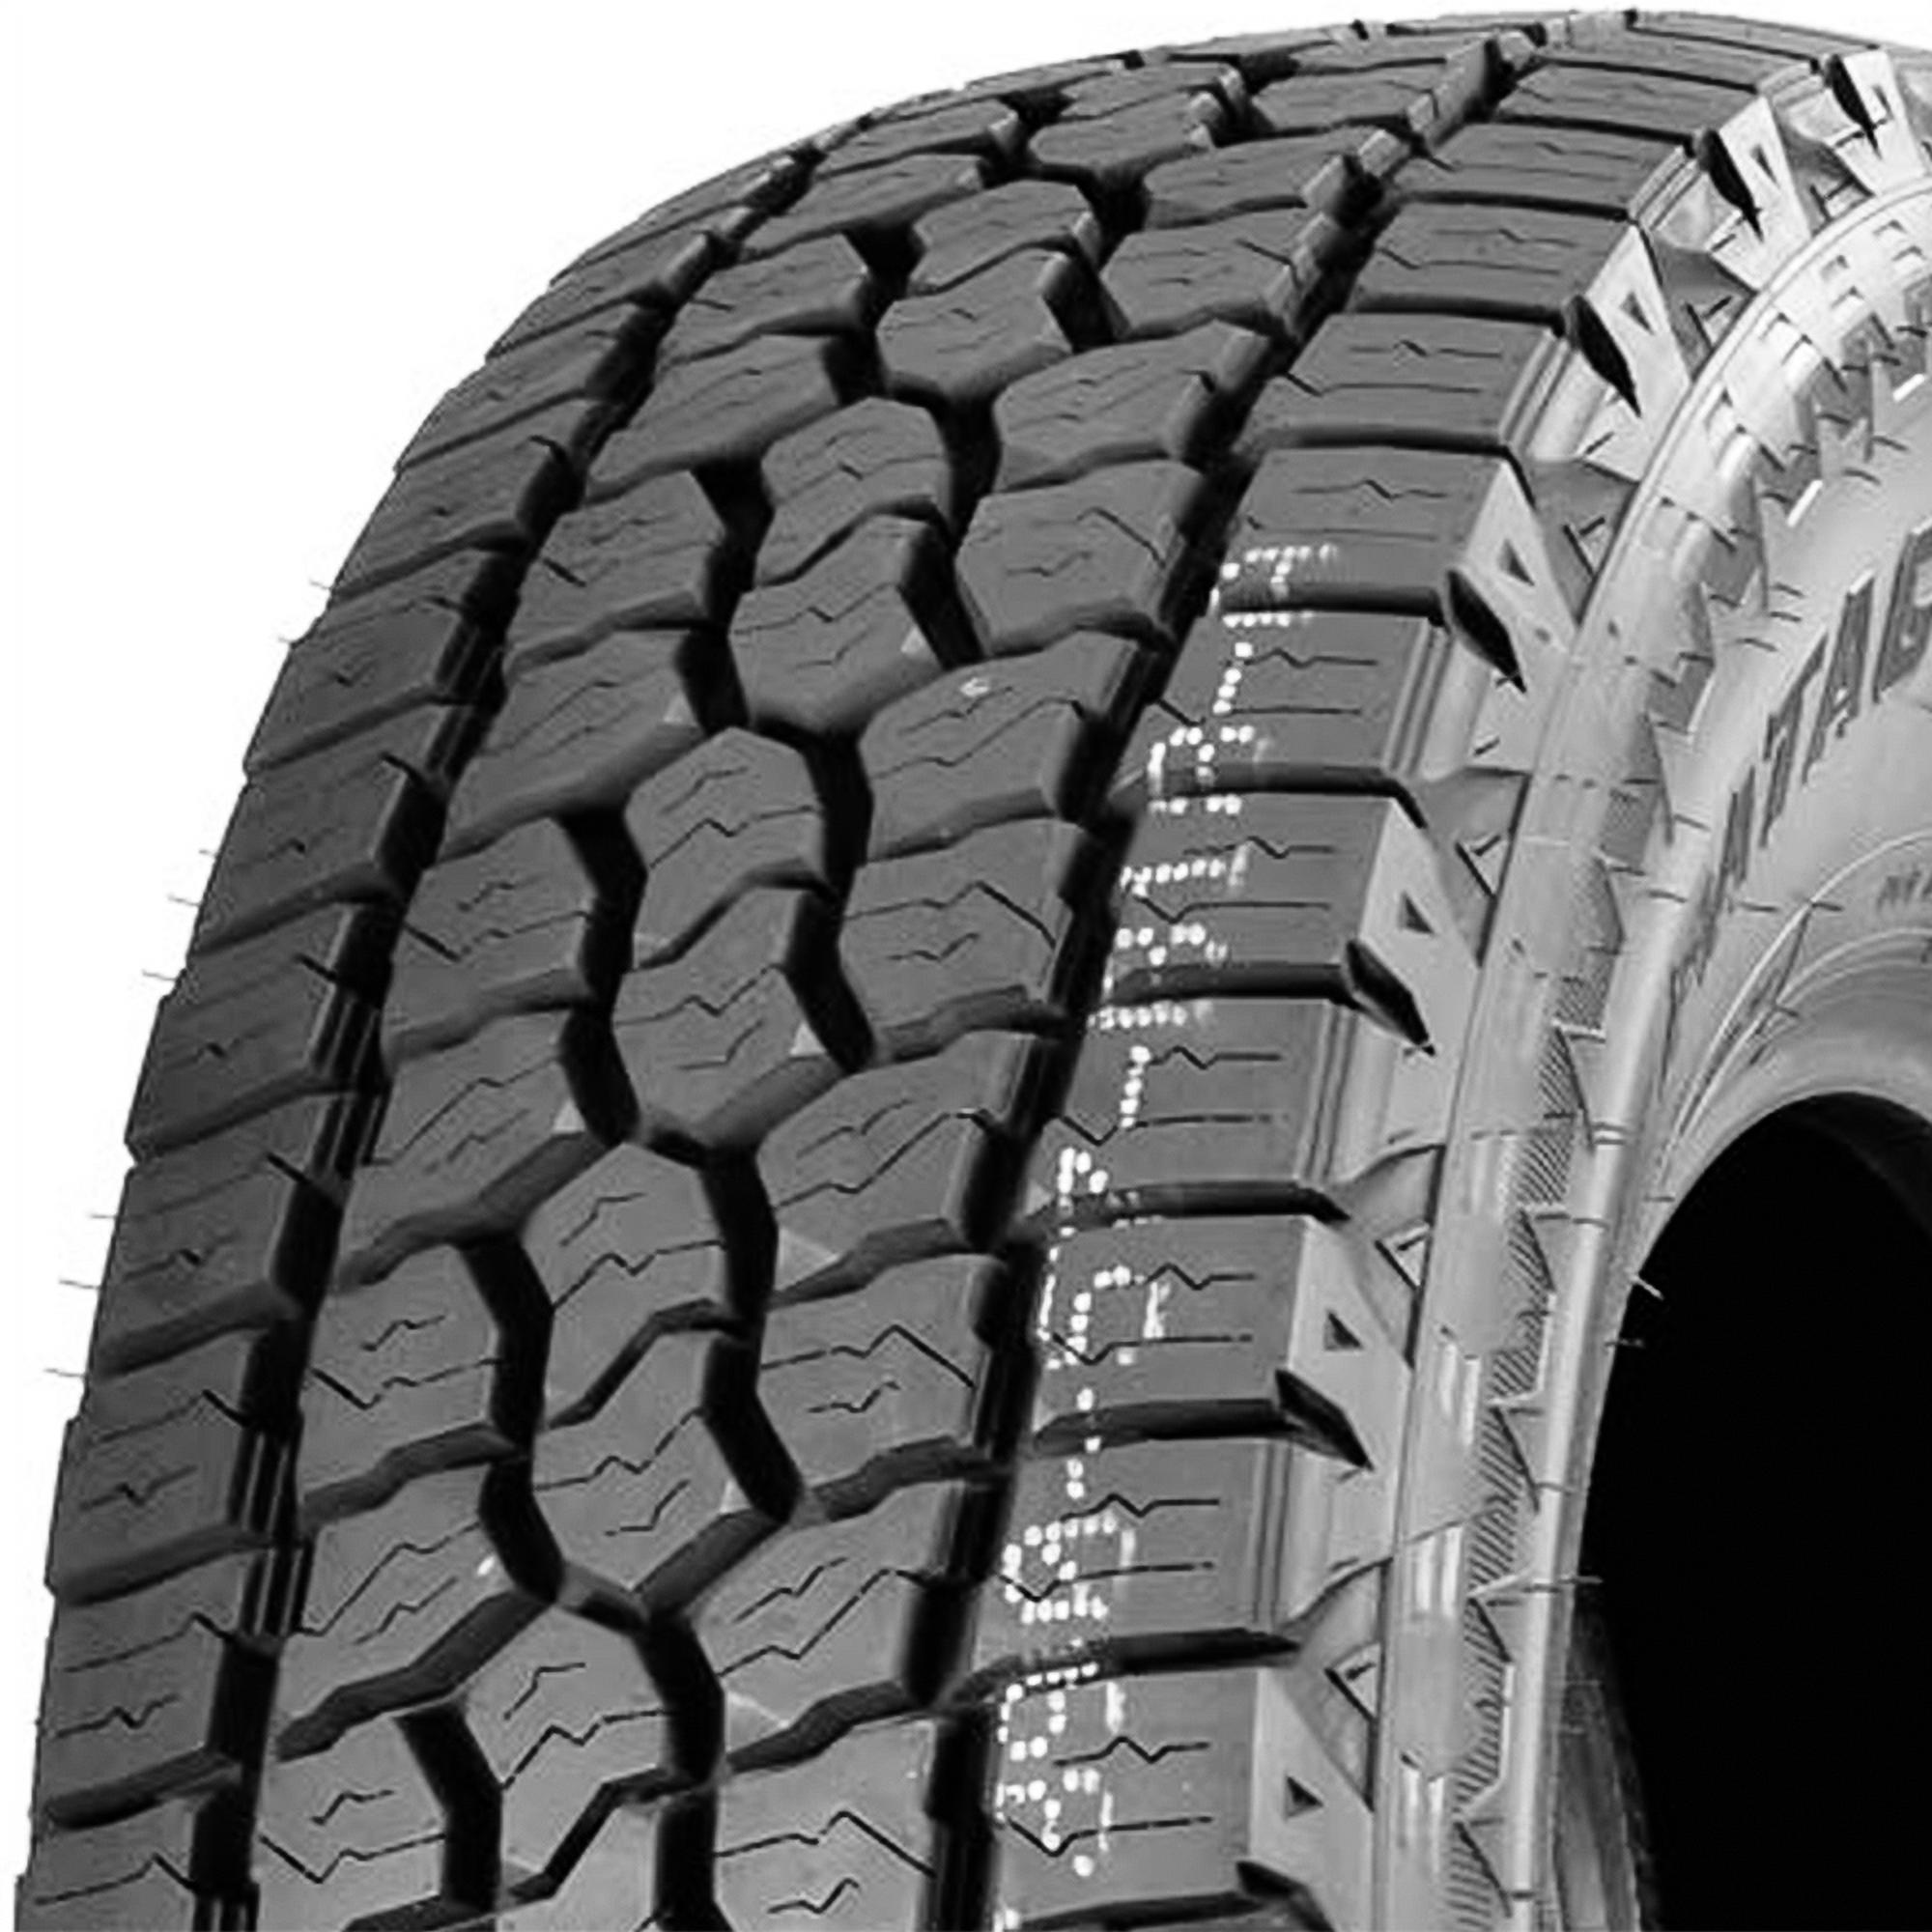 Pair of 2 (TWO) Milestar Patagonia A/T R LT 245/75R17 Load E 10 Ply Rugged Terrain Tires Fits: 2011-13 Chevrolet Silverado 2500 HD WT - image 2 of 3